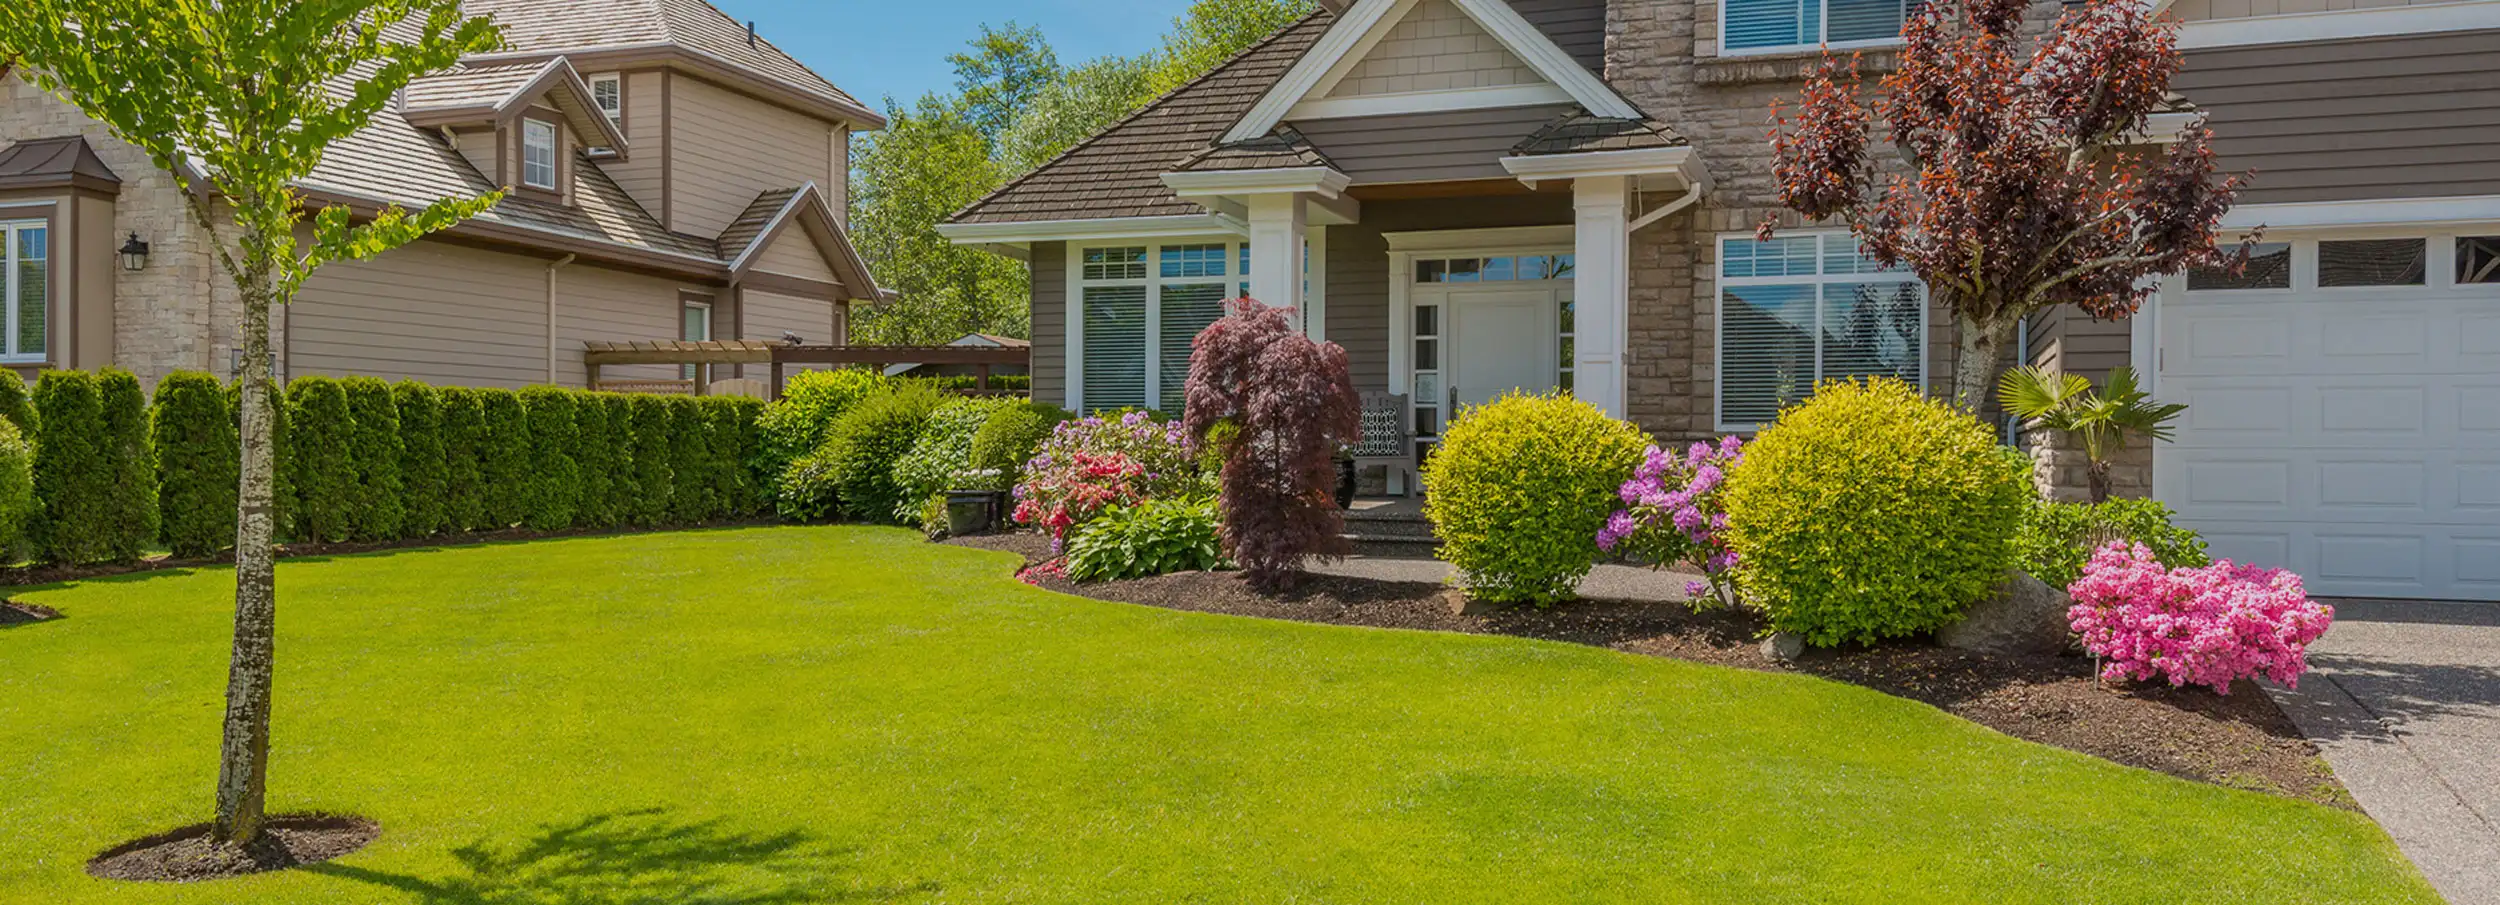 home with landscaping grounds guys header